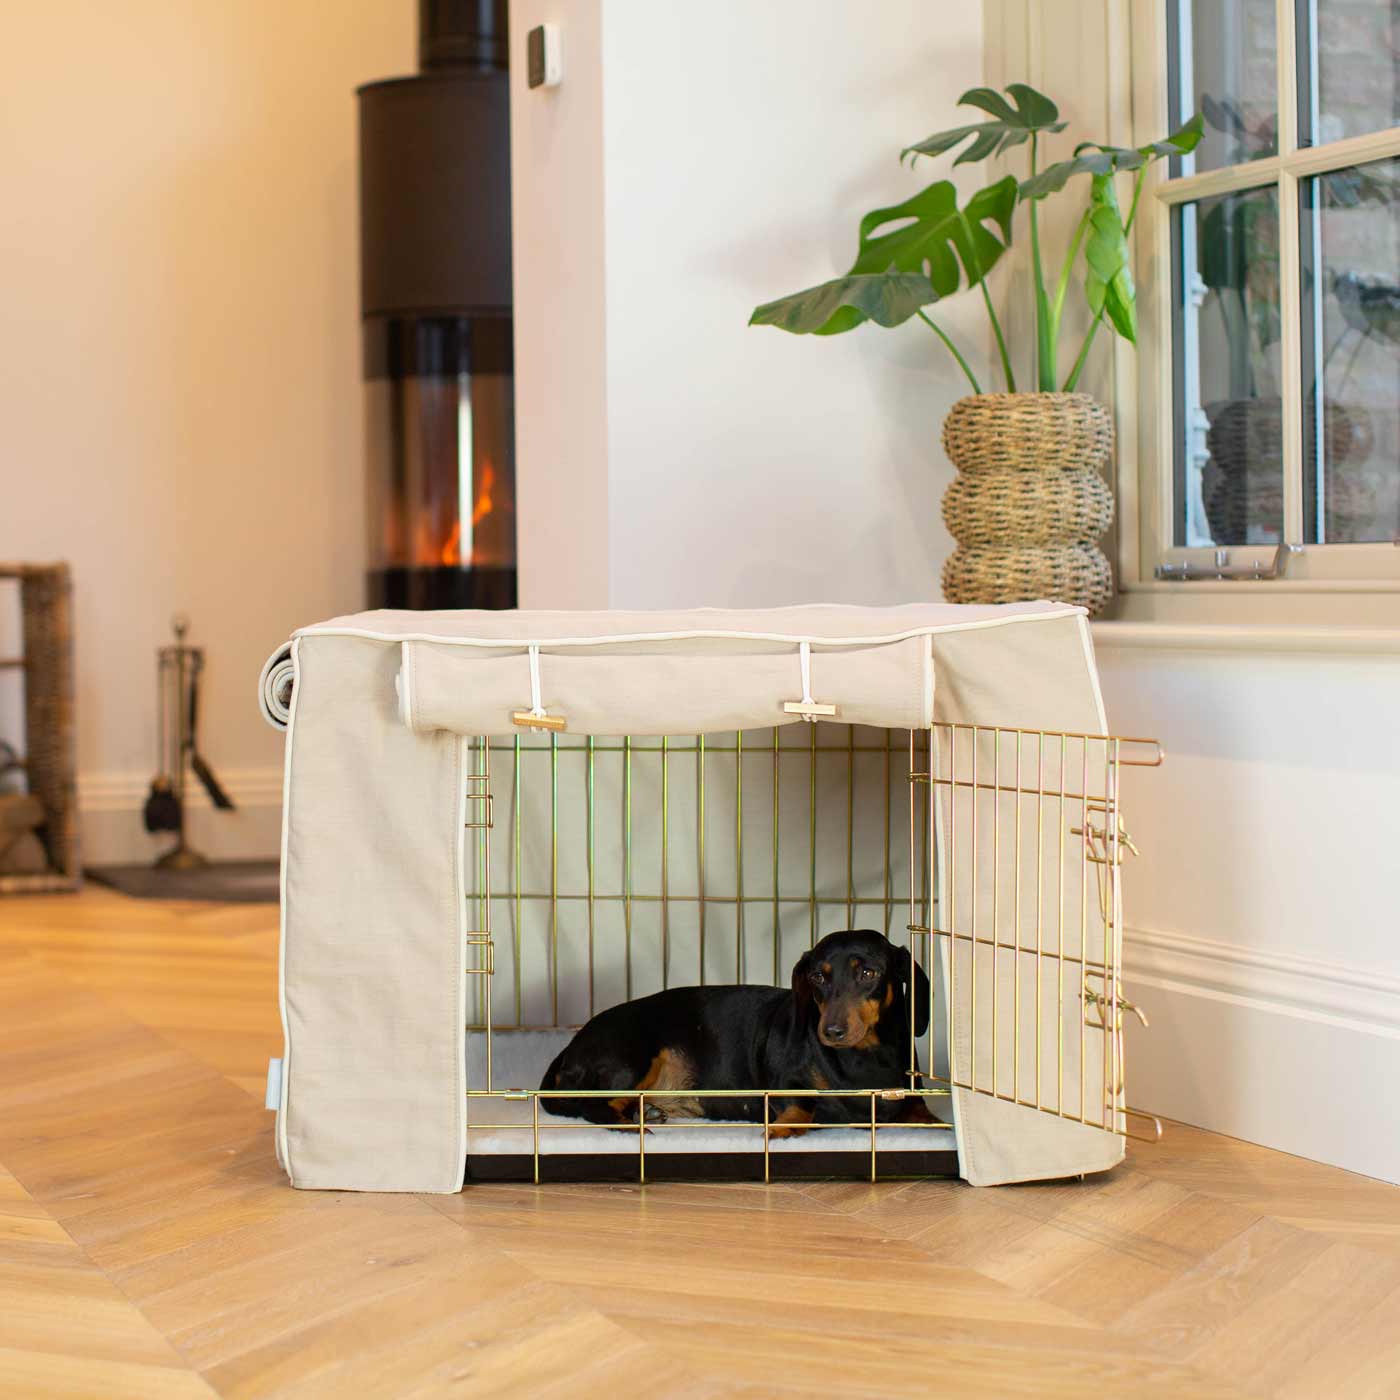 Discover Our Heavy-Duty Dog Crate With Savanna Oatmeal Crate Cover The Perfect Crate Accessory For The Ultimate Pet Den. Available To Personalise at Lords & Labradors 